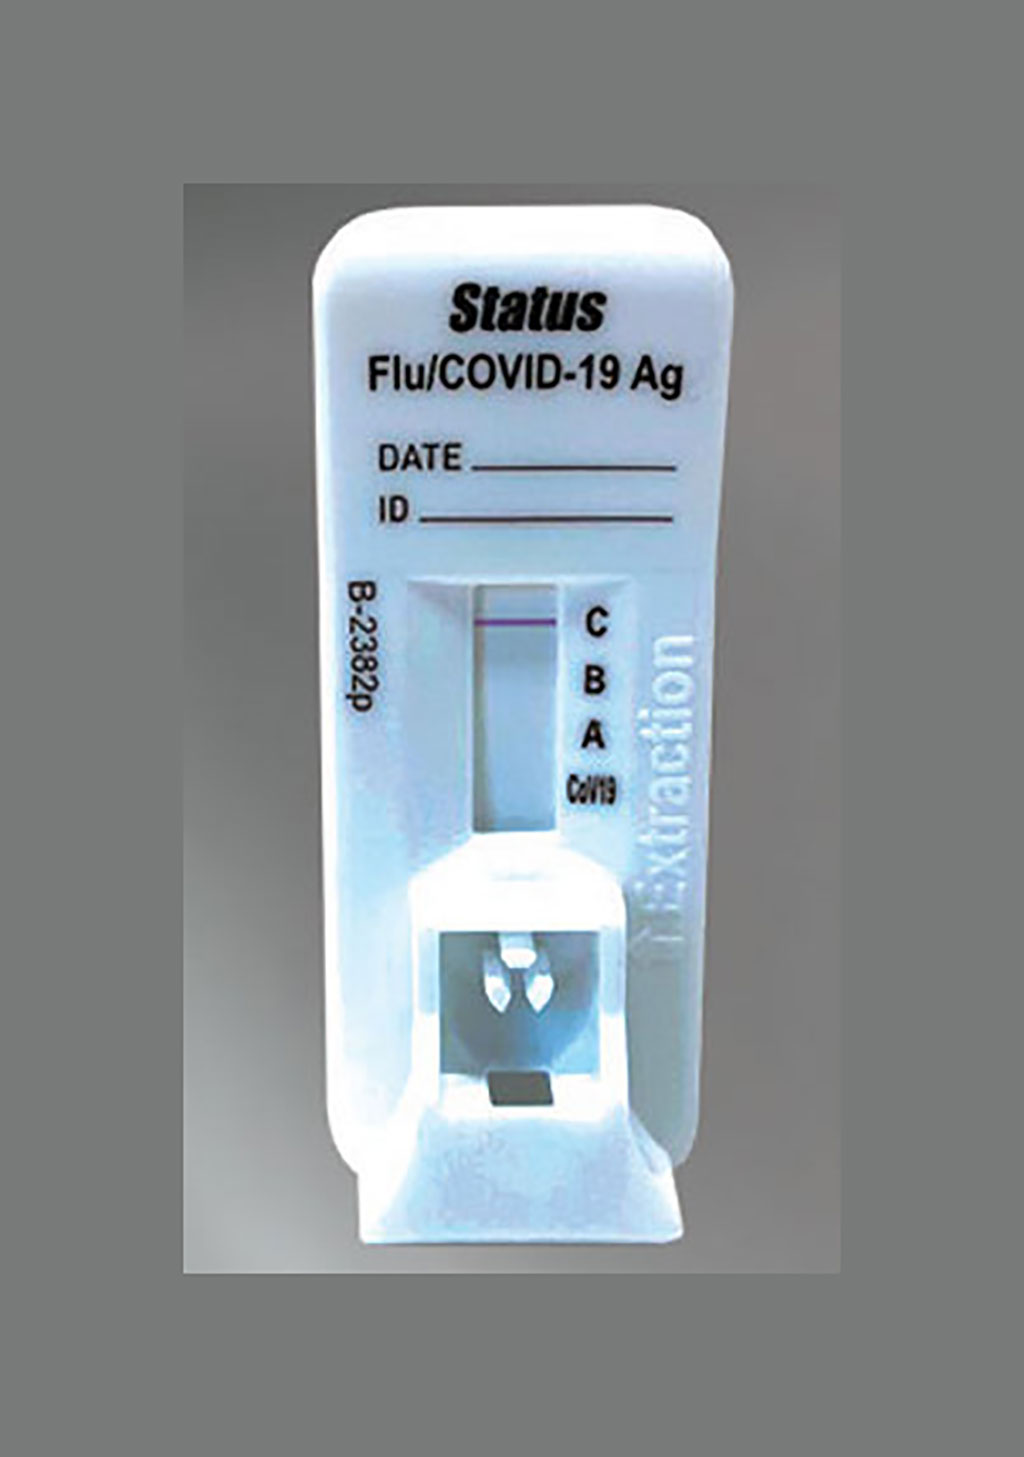 Illustration: Rapid POC Test for Detecting COVID-19 Antigens, Flu A/B (Photo courtesy of Chembio Diagnostic Systems, Inc.)